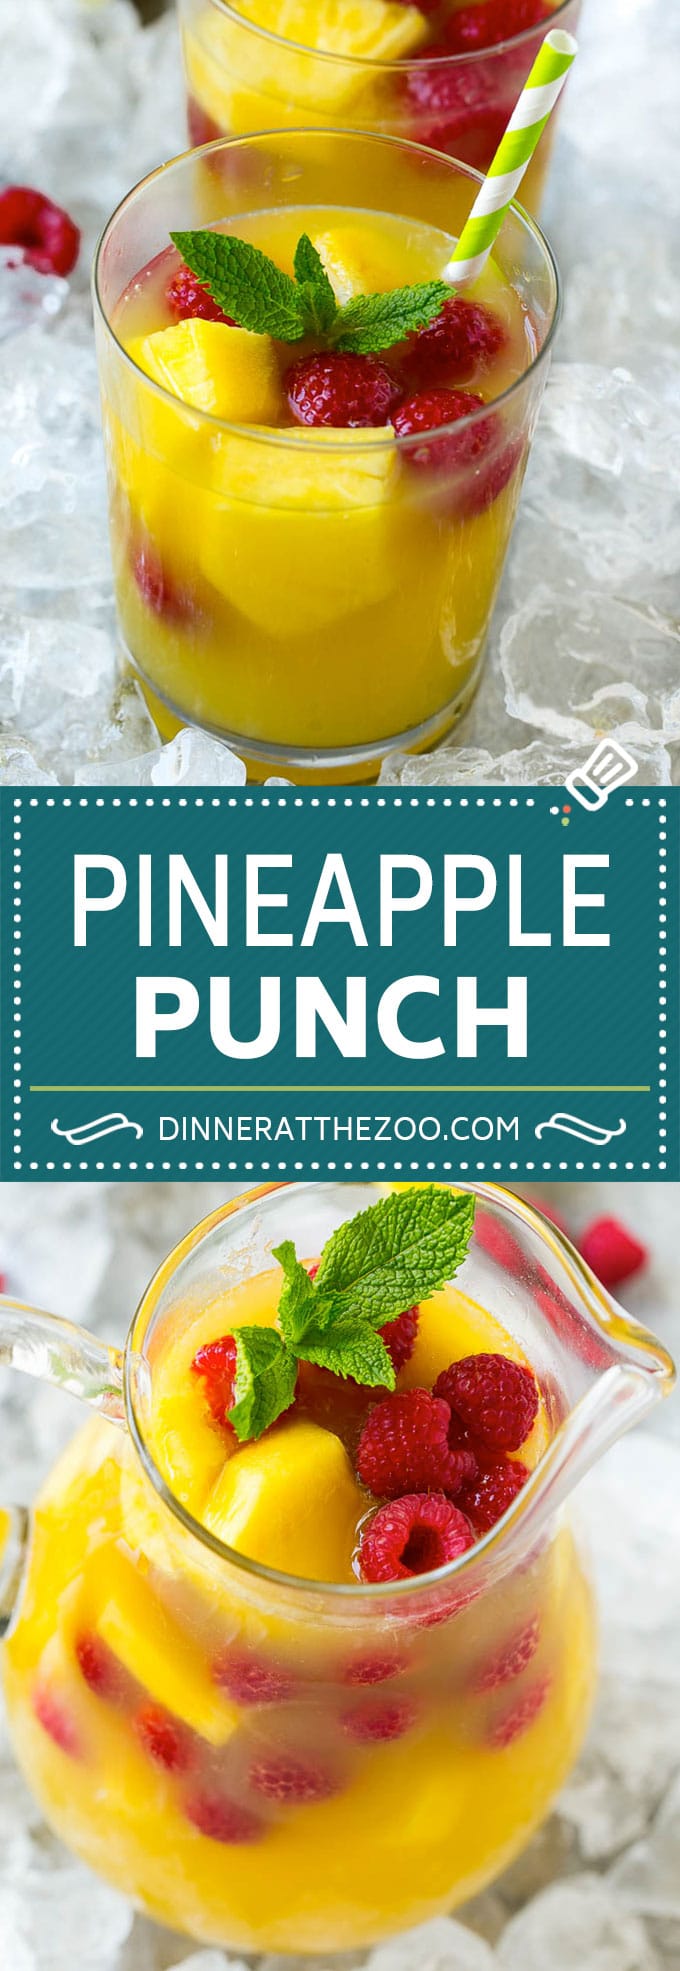 Pineapple Punch Recipe | Sparkling Punch | Fruit Punch | Pineapple Drink #pineapple #drink #dinneratthezoo